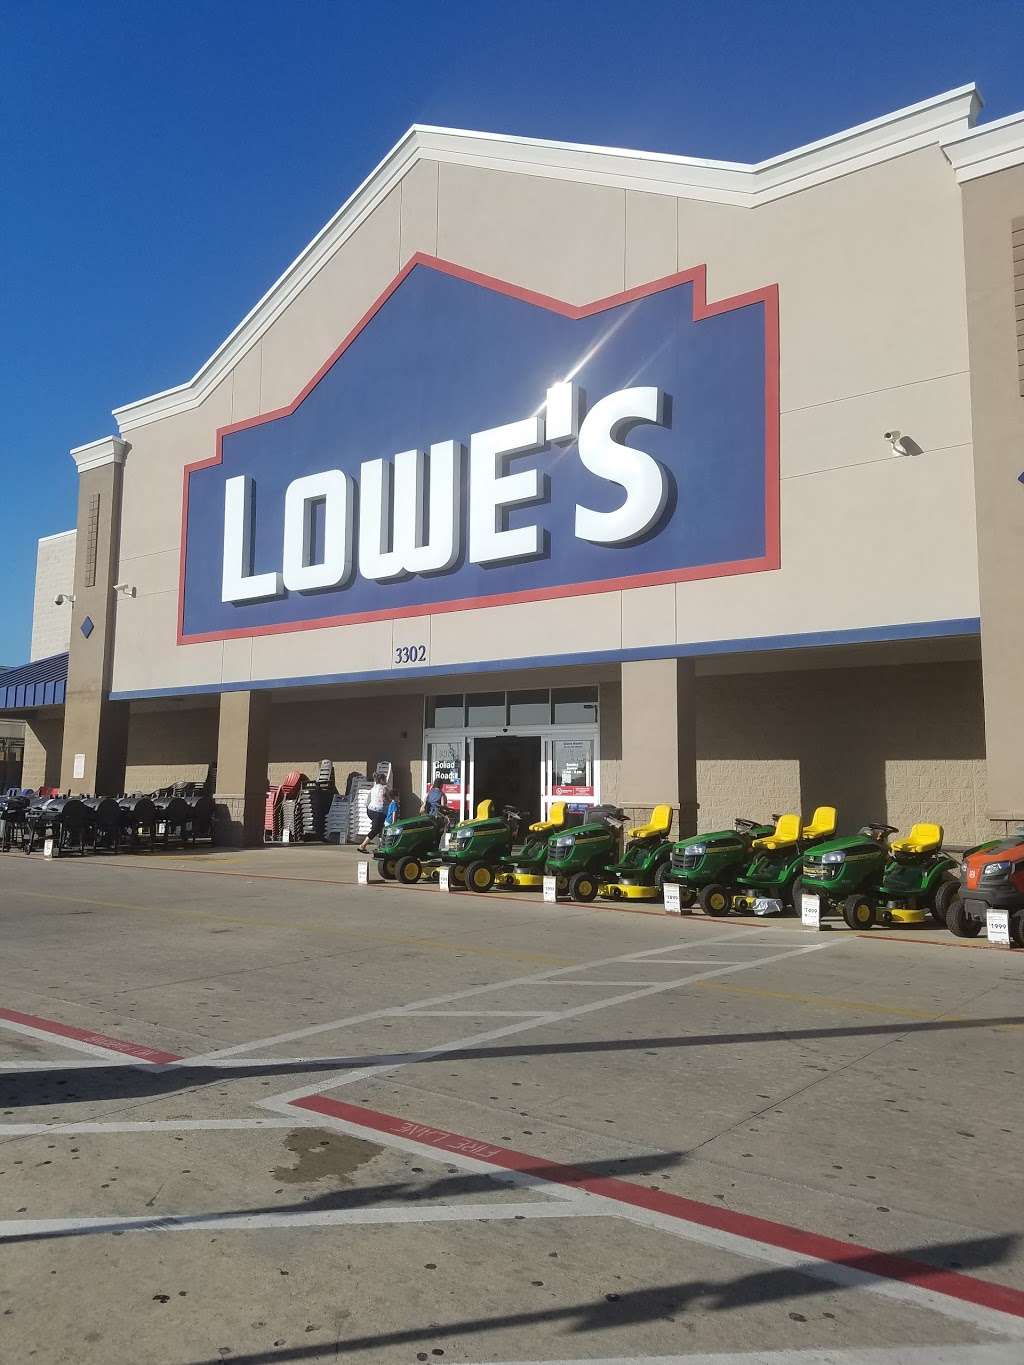 Lowe S Home Improvement 47 Photos 58 Reviews Hardware Stores 7901 Callaghan Road Medical Center San Antonio Tx Phone Number Yelp